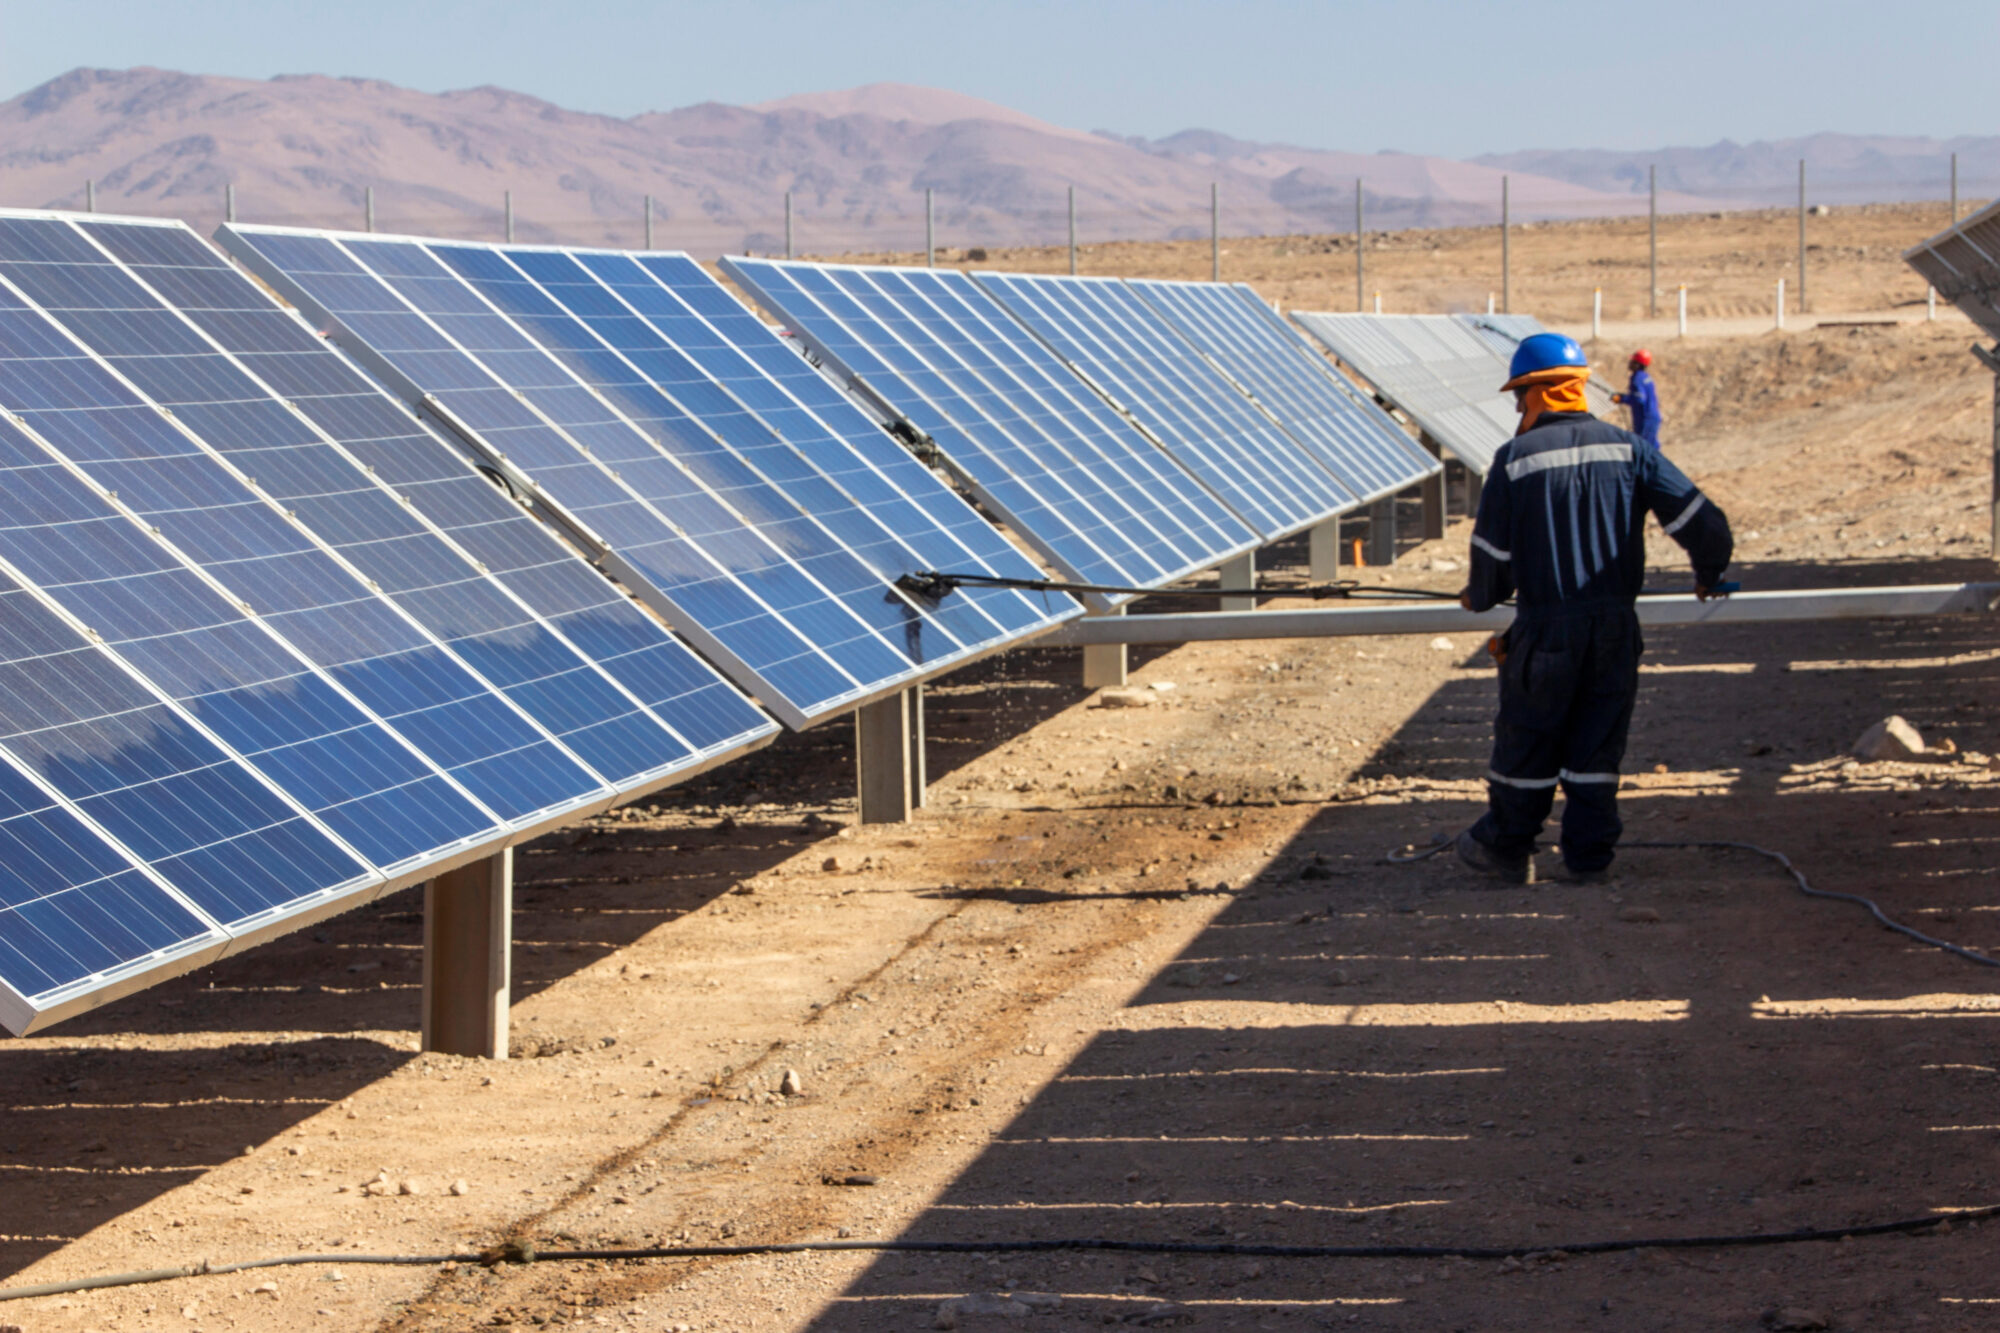 <p>Solar panels are cleaned in the Atacama desert. Chile has had notable successes in increasing renewable energy capacity in recent years, but like many in Latin America, still faces financial and political obstacles in the transition away from fossil fuels. (Image: Francisco Javier Ramos Rosellon / Alamy)</p>